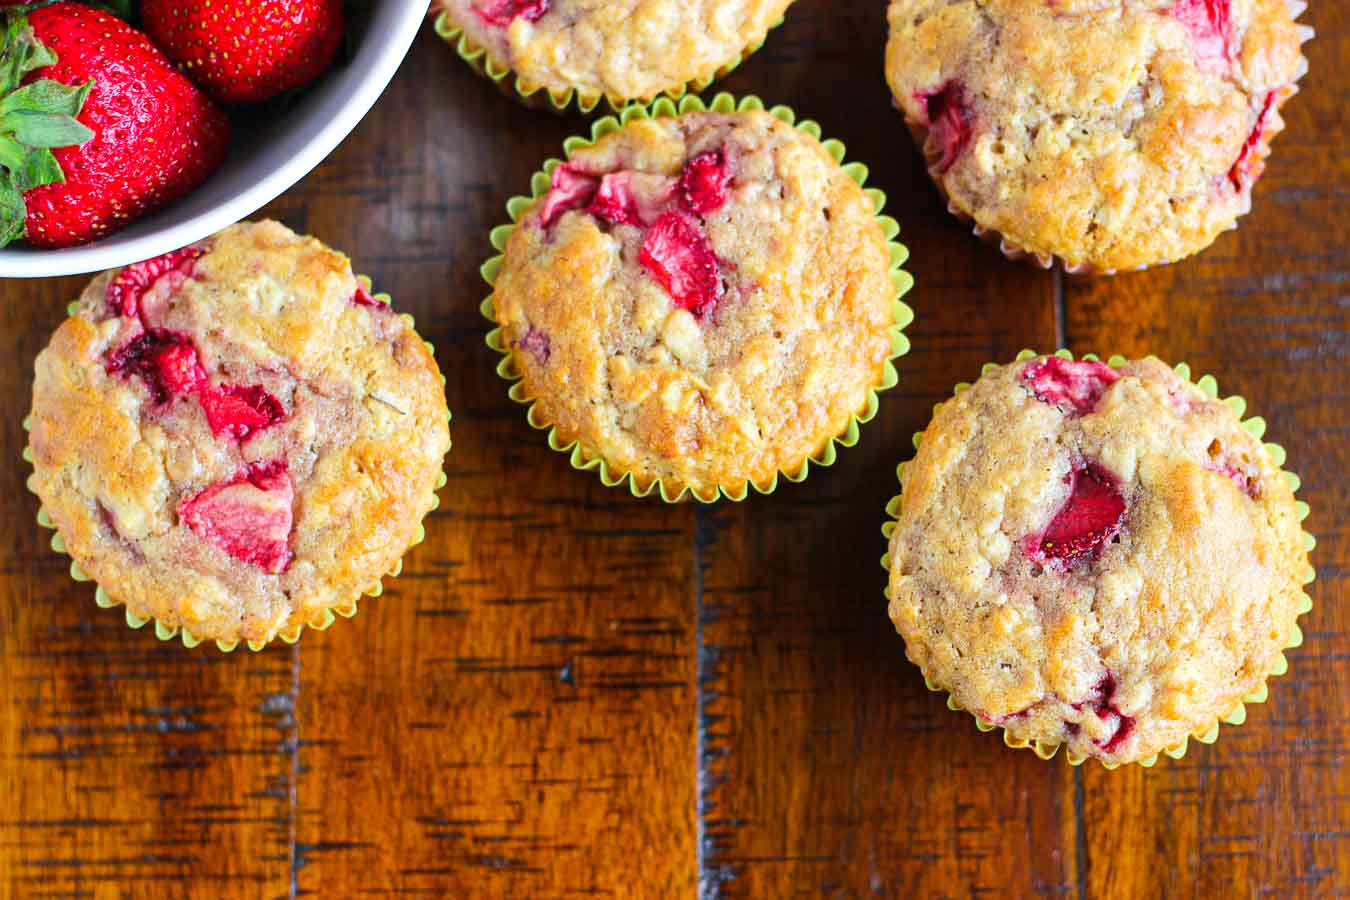 Strawberry muffins with a bowl of whole strawberries